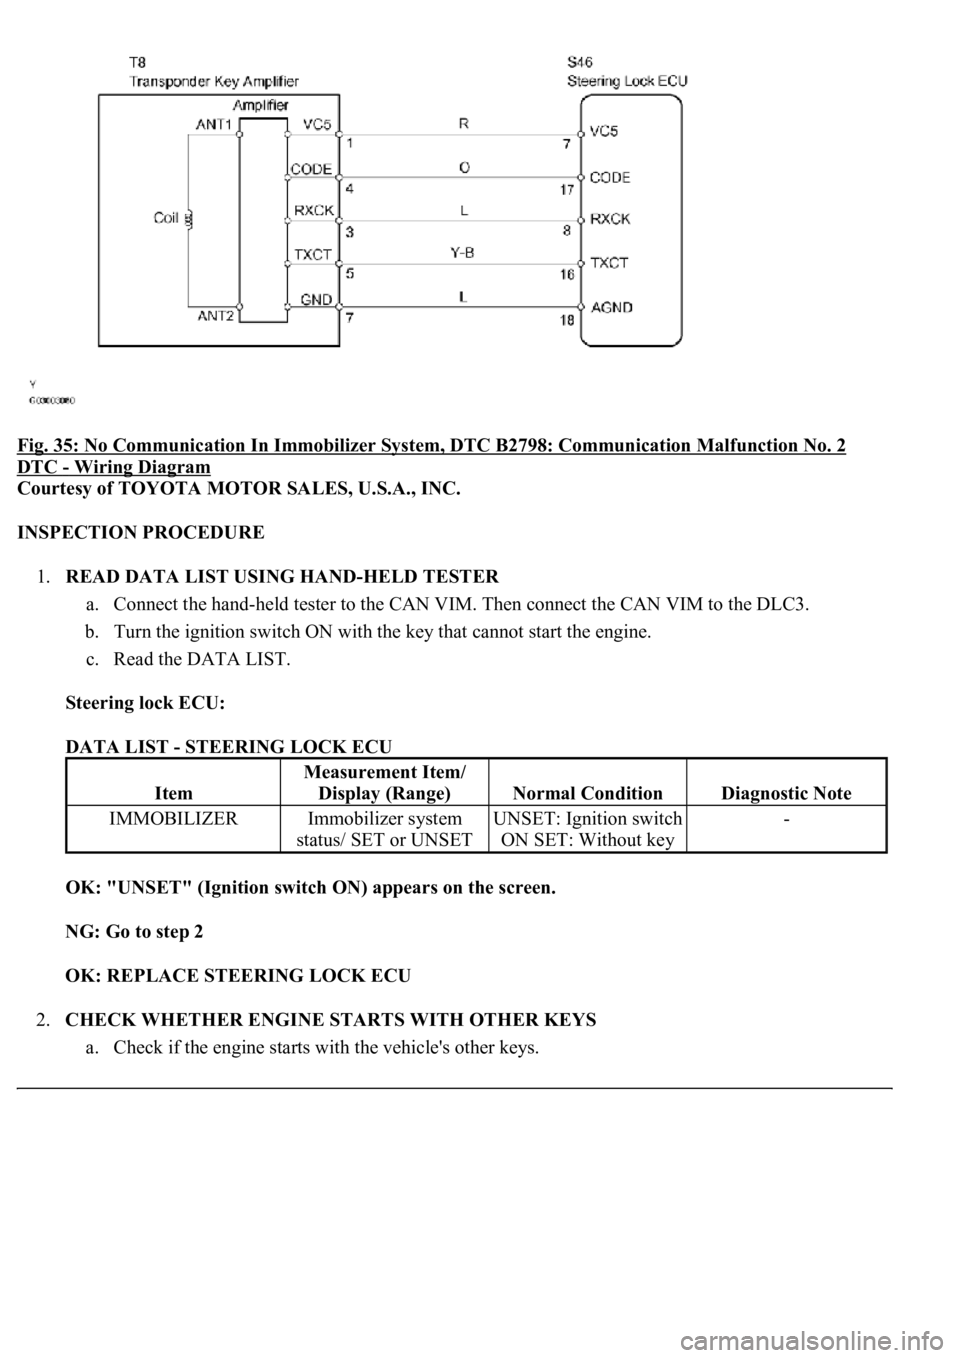 LEXUS LS430 2003  Factory Repair Manual Fig. 35: No Communication In Immobilizer System, DTC B2798: Communication Malfunction No. 2 
DTC - Wiring Diagram 
Courtesy of TOYOTA MOTOR SALES, U.S.A., INC. 
INSPECTION PROCEDURE 
1.READ DATA LIST 